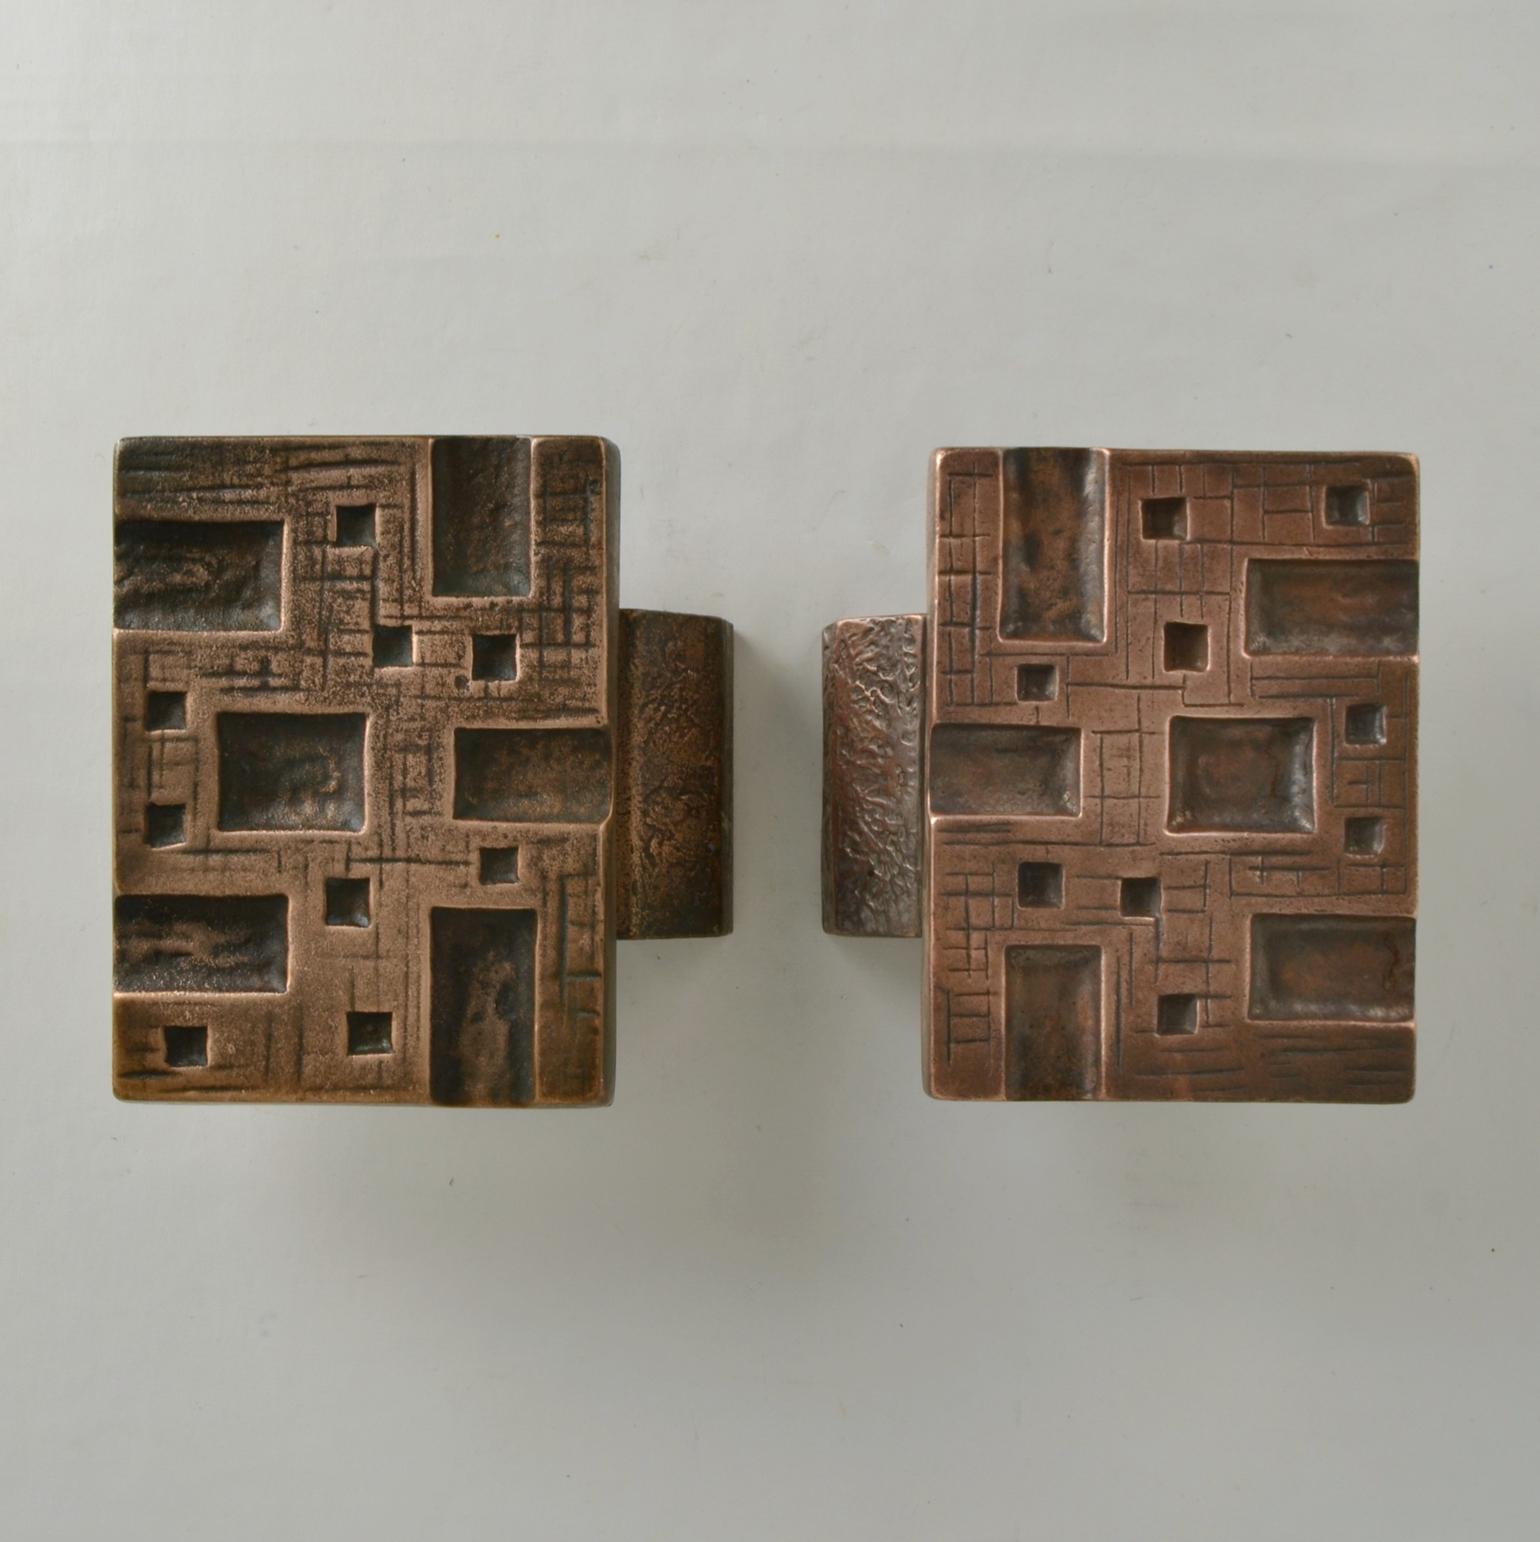 Brutalist pair of bronze relief with strong relief and geometric pattern with repetition of squares is made in the 1960-70's. These heavy pieces, made of cast bronze are in perfect condition. The bronze is oyidized, creating a patina to the textured